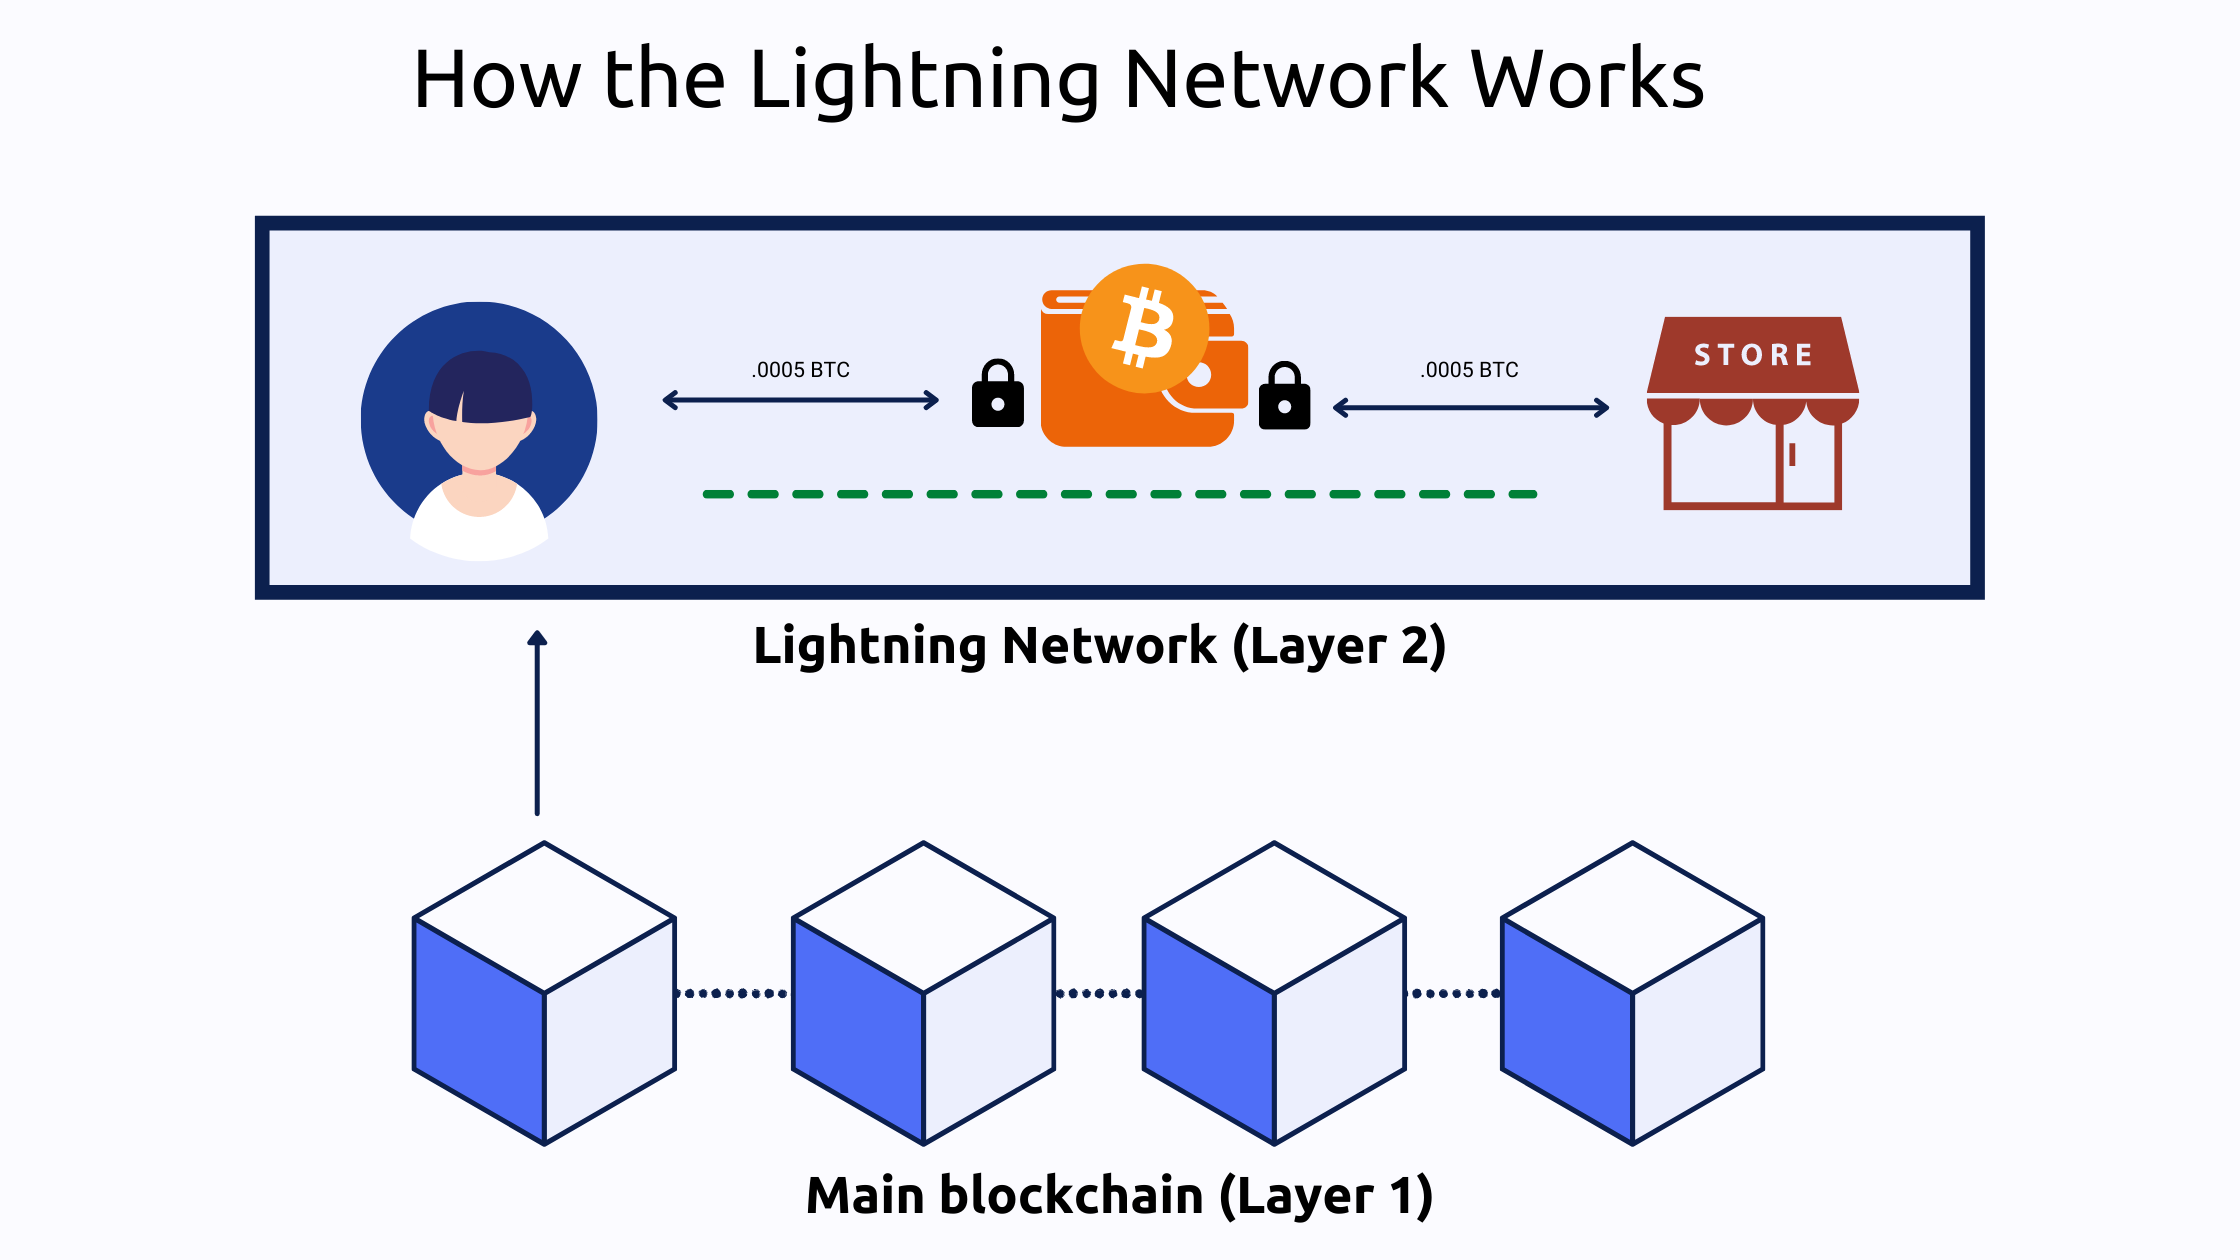 What is the Lightning Network?